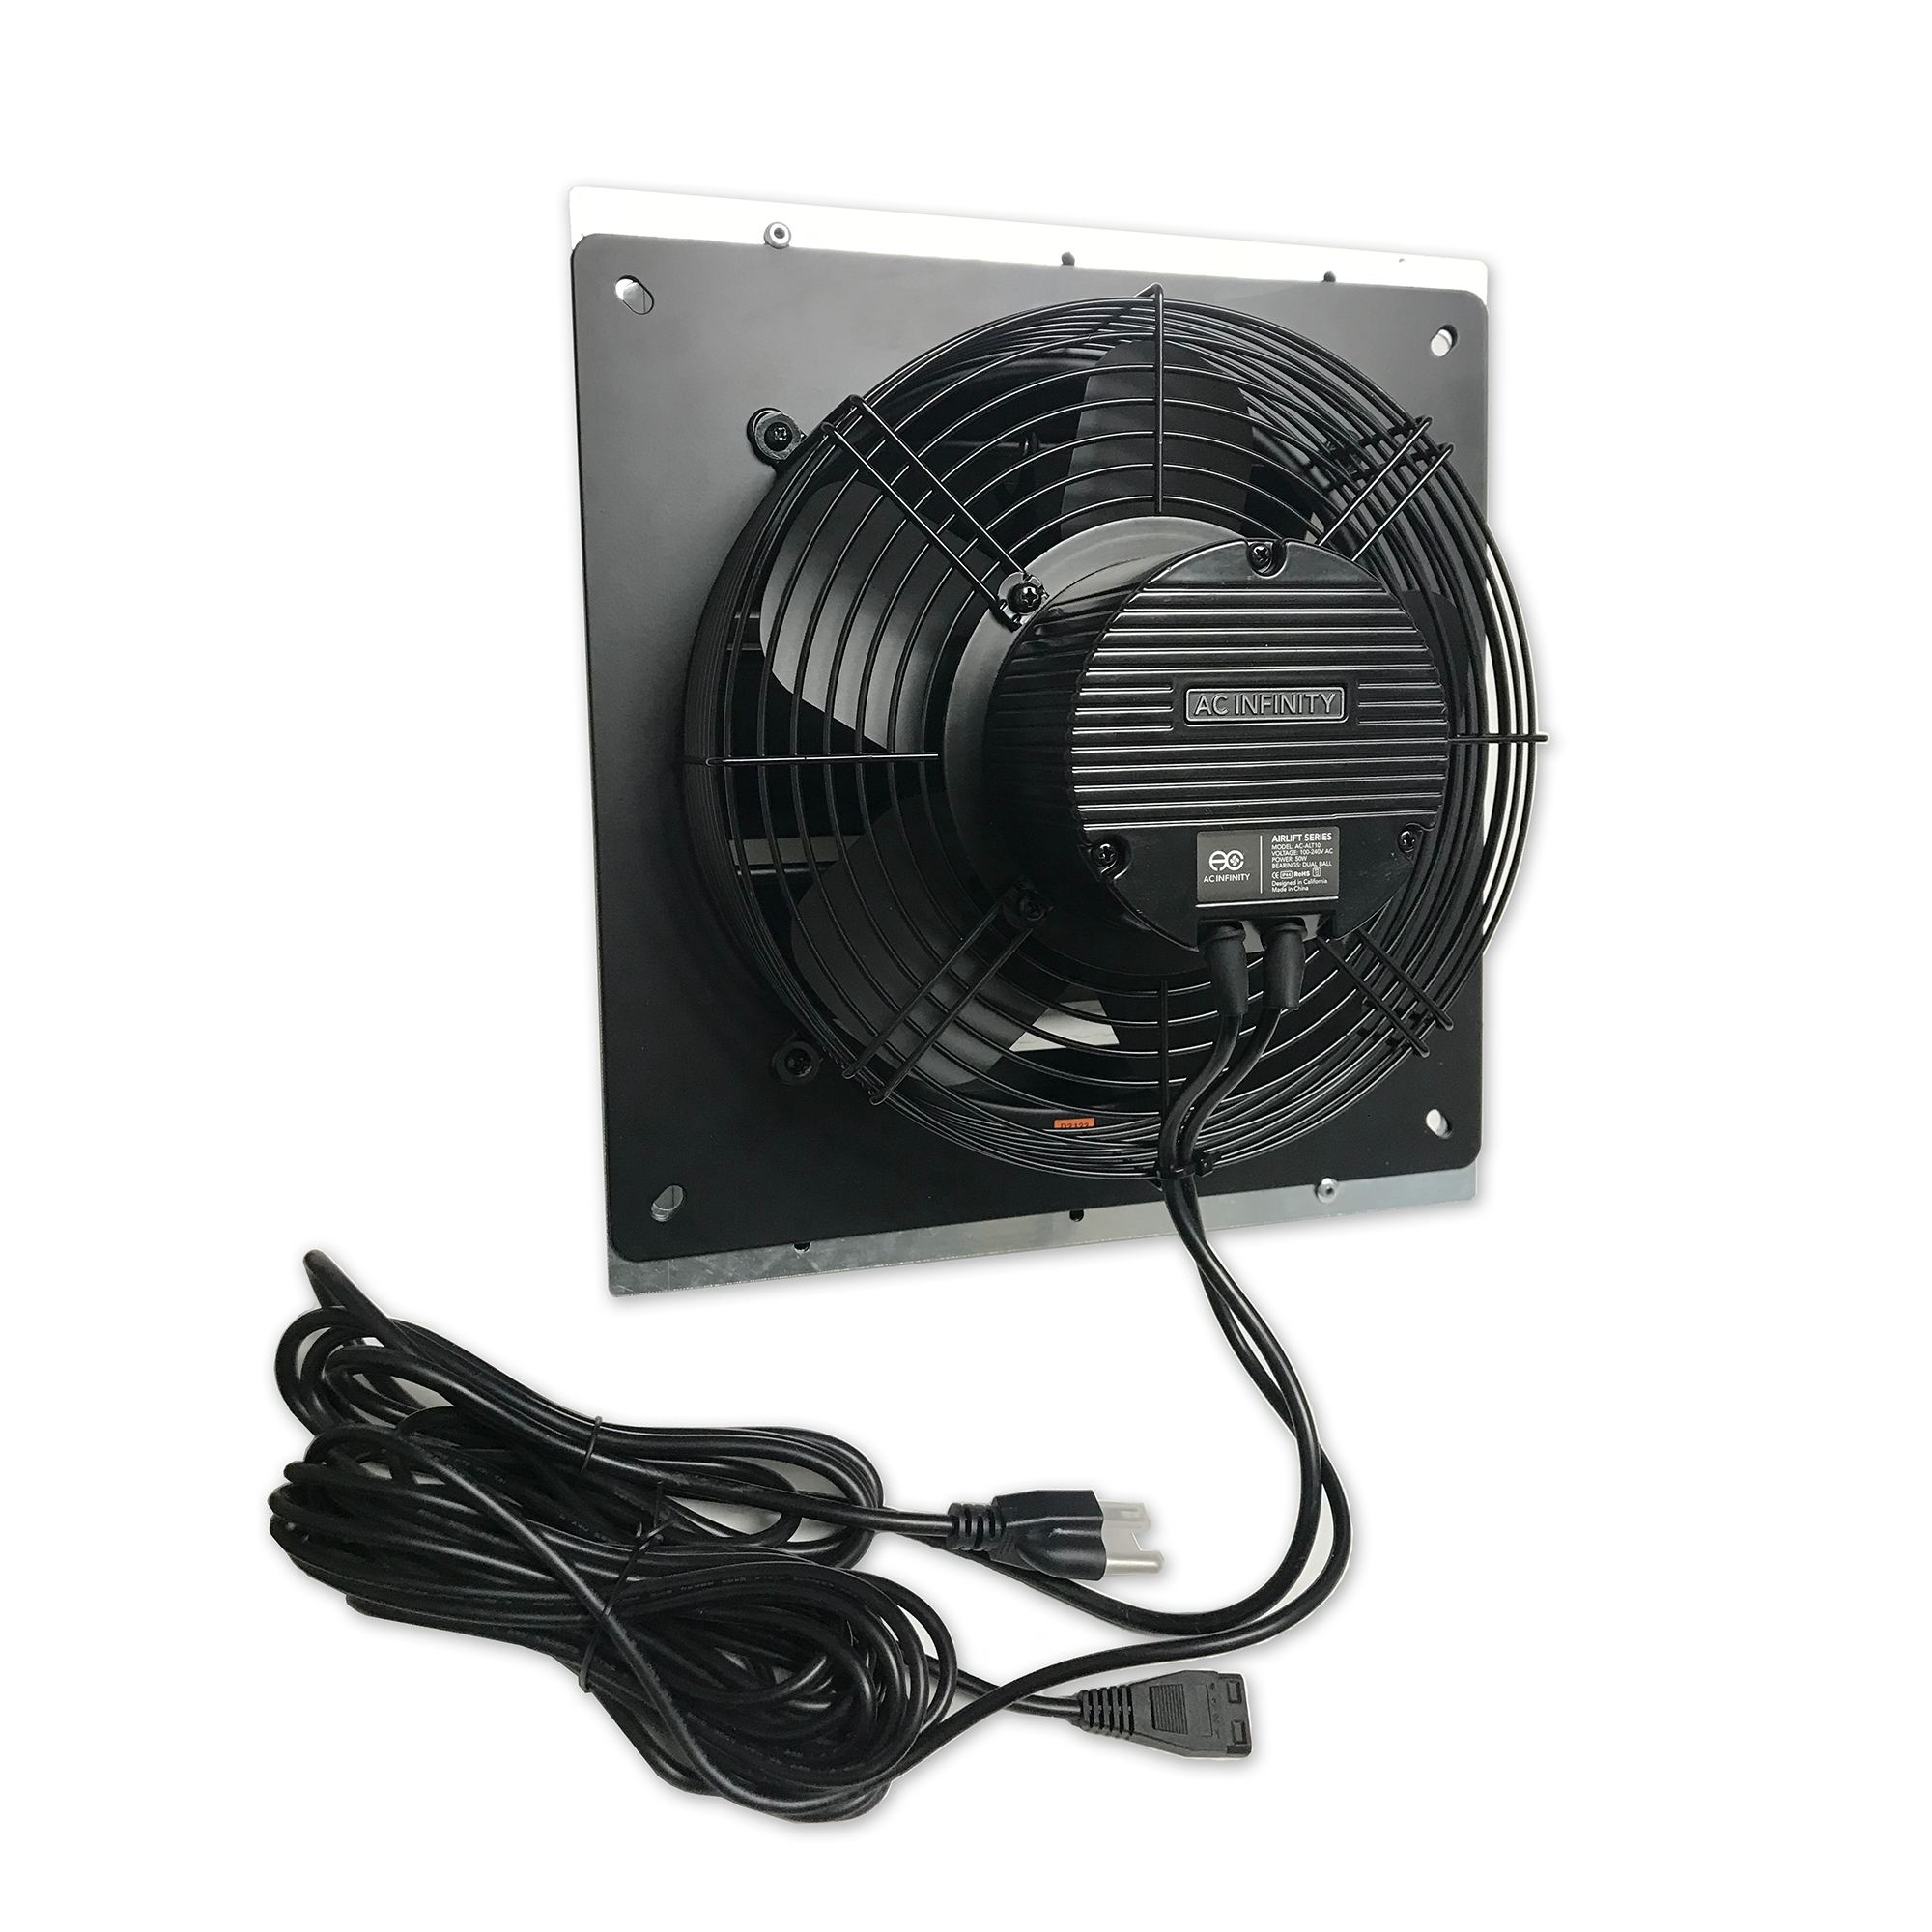 The T10 Air Lift Exhaust Fan w/ Temperature and Humidity Controller is powered by AC Infinity for Shipping Containers